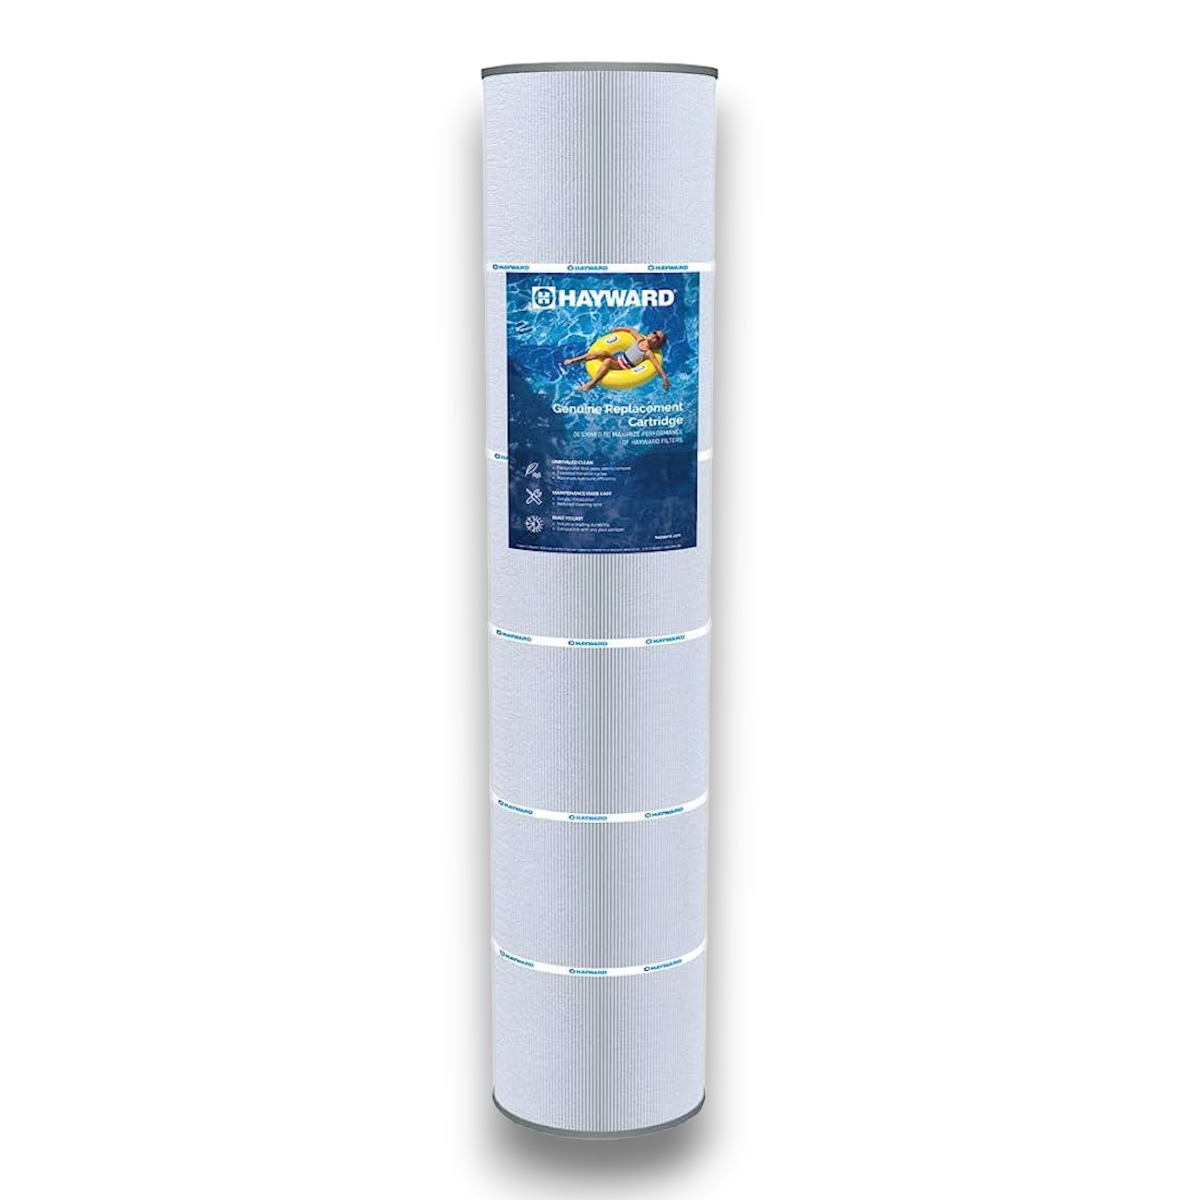 Hayward C5025/C5030 Replacement Cartridge Filter CX1280XRE for use with SwimClear C5030/C5025/C5030 | CX1280XRE